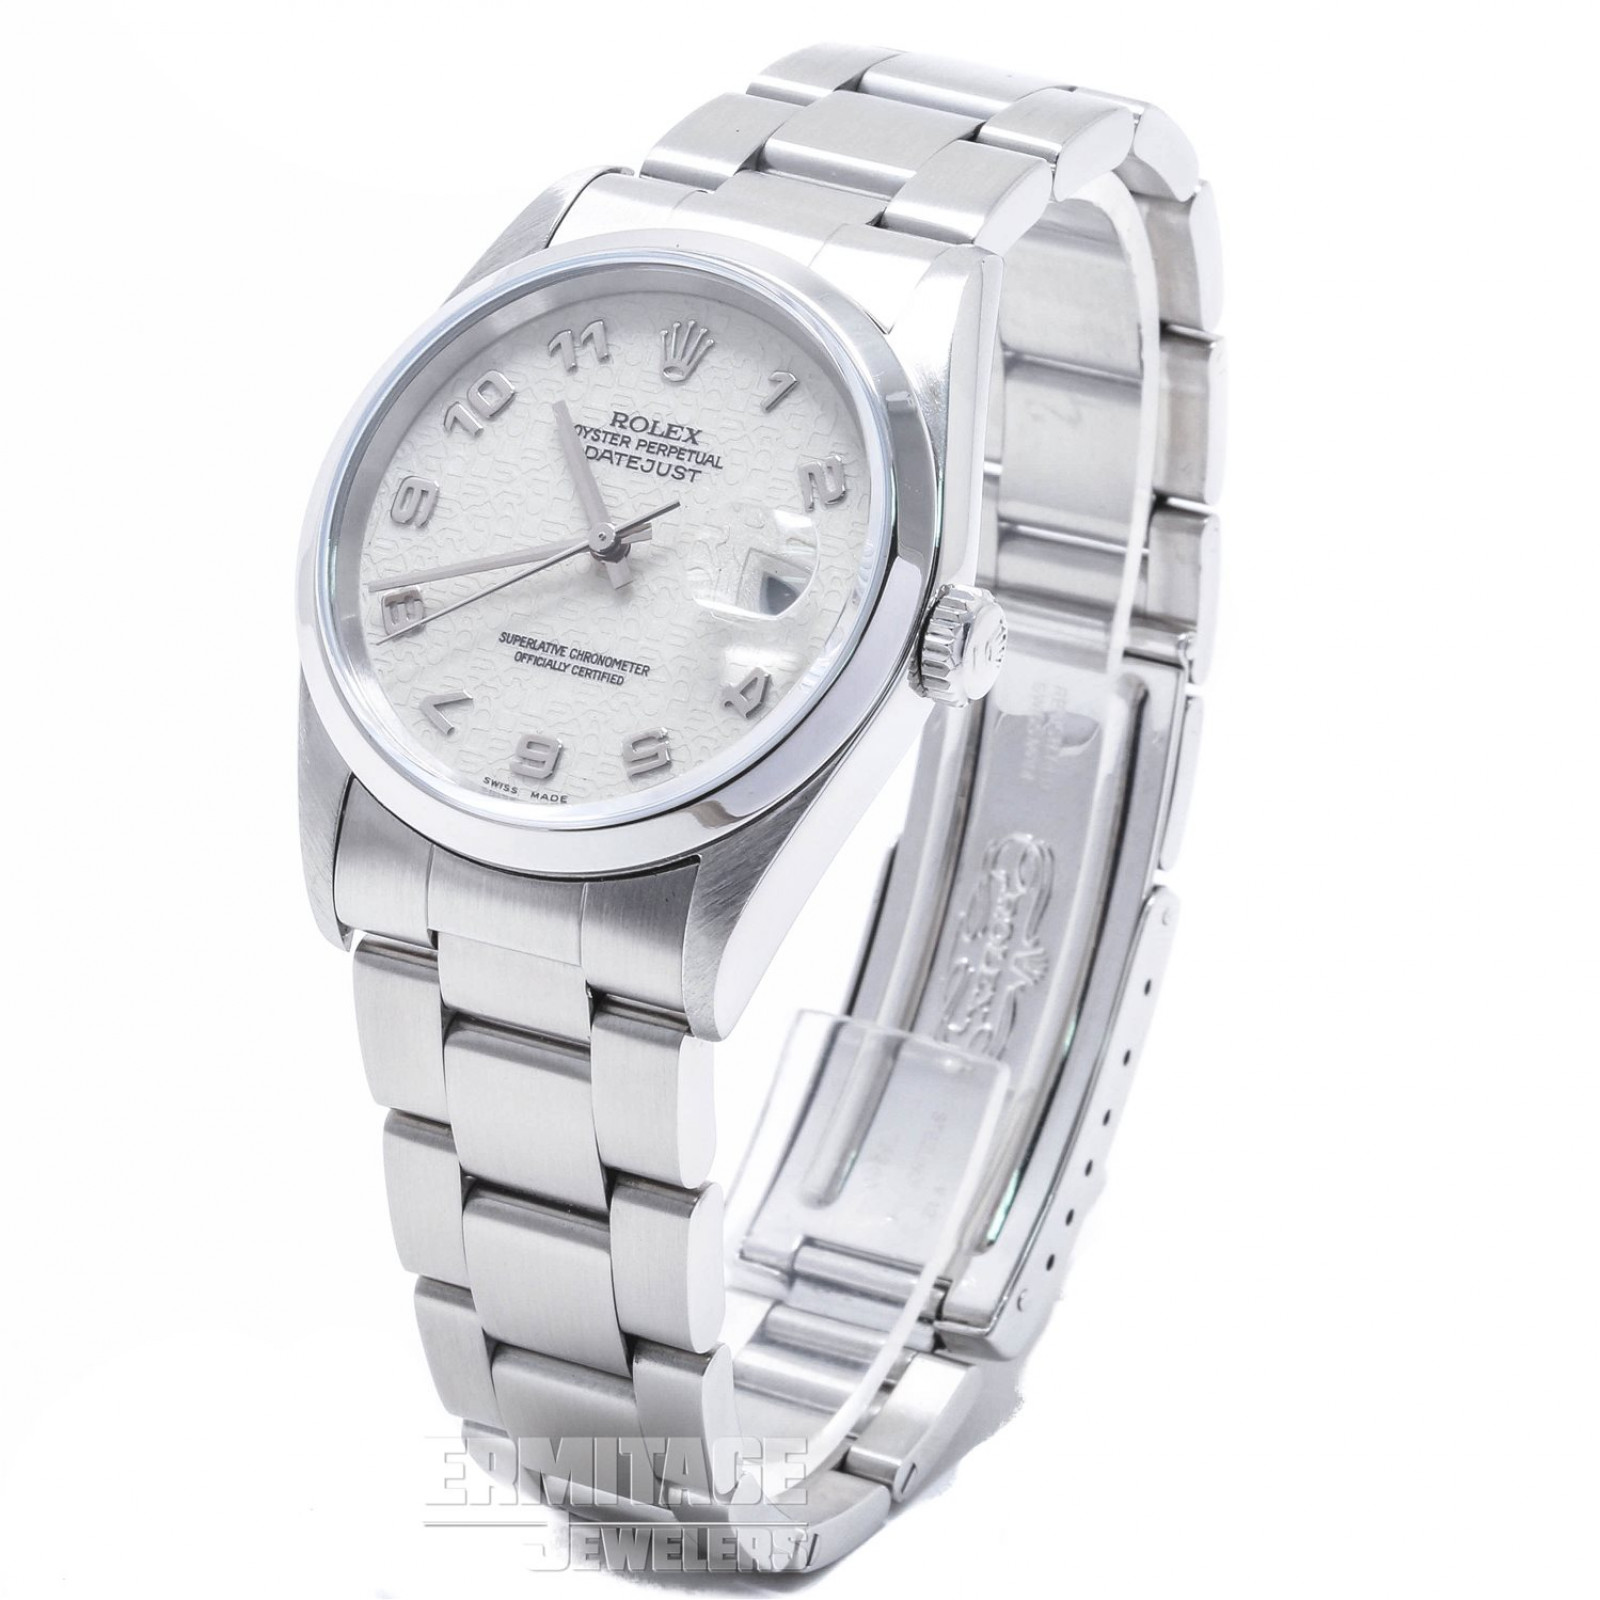 Rolex Datejust 16200 with Ivory Dial